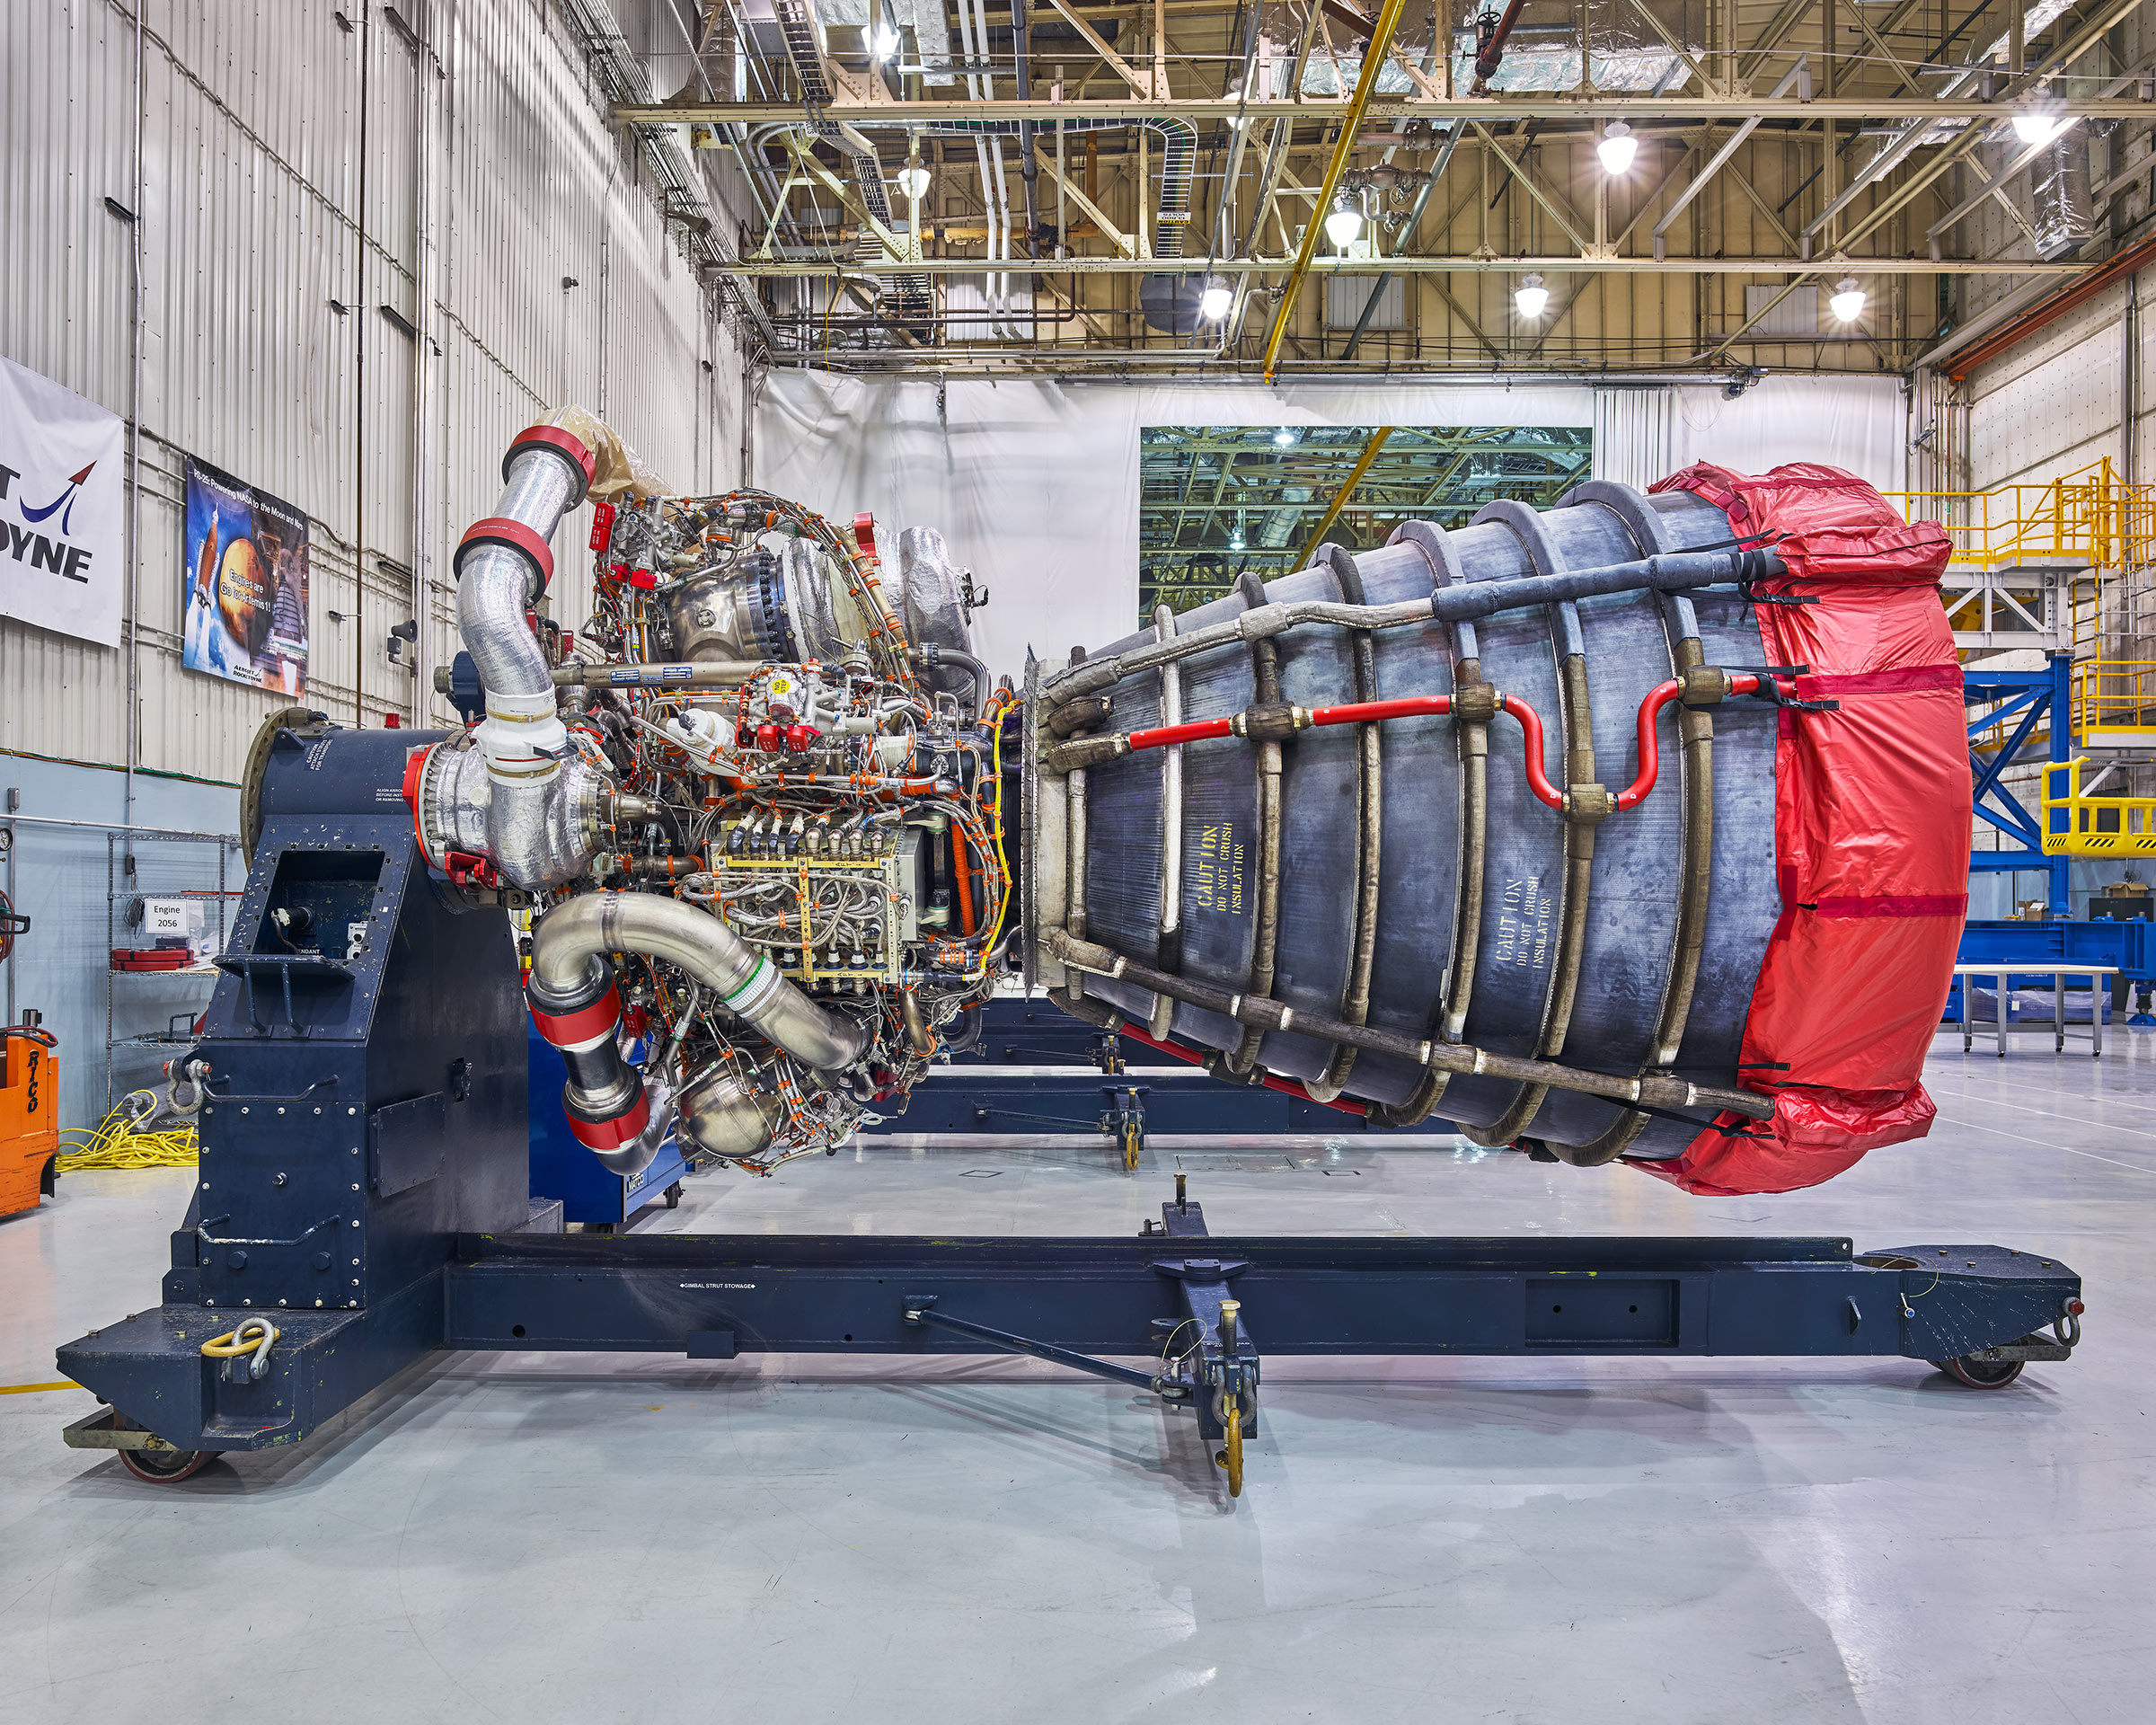 One of the four engines that will be used, along with two solid rocket boosters, to launch NASA’s moon rocket and ascend it into space (Christopher Payne for TIME)